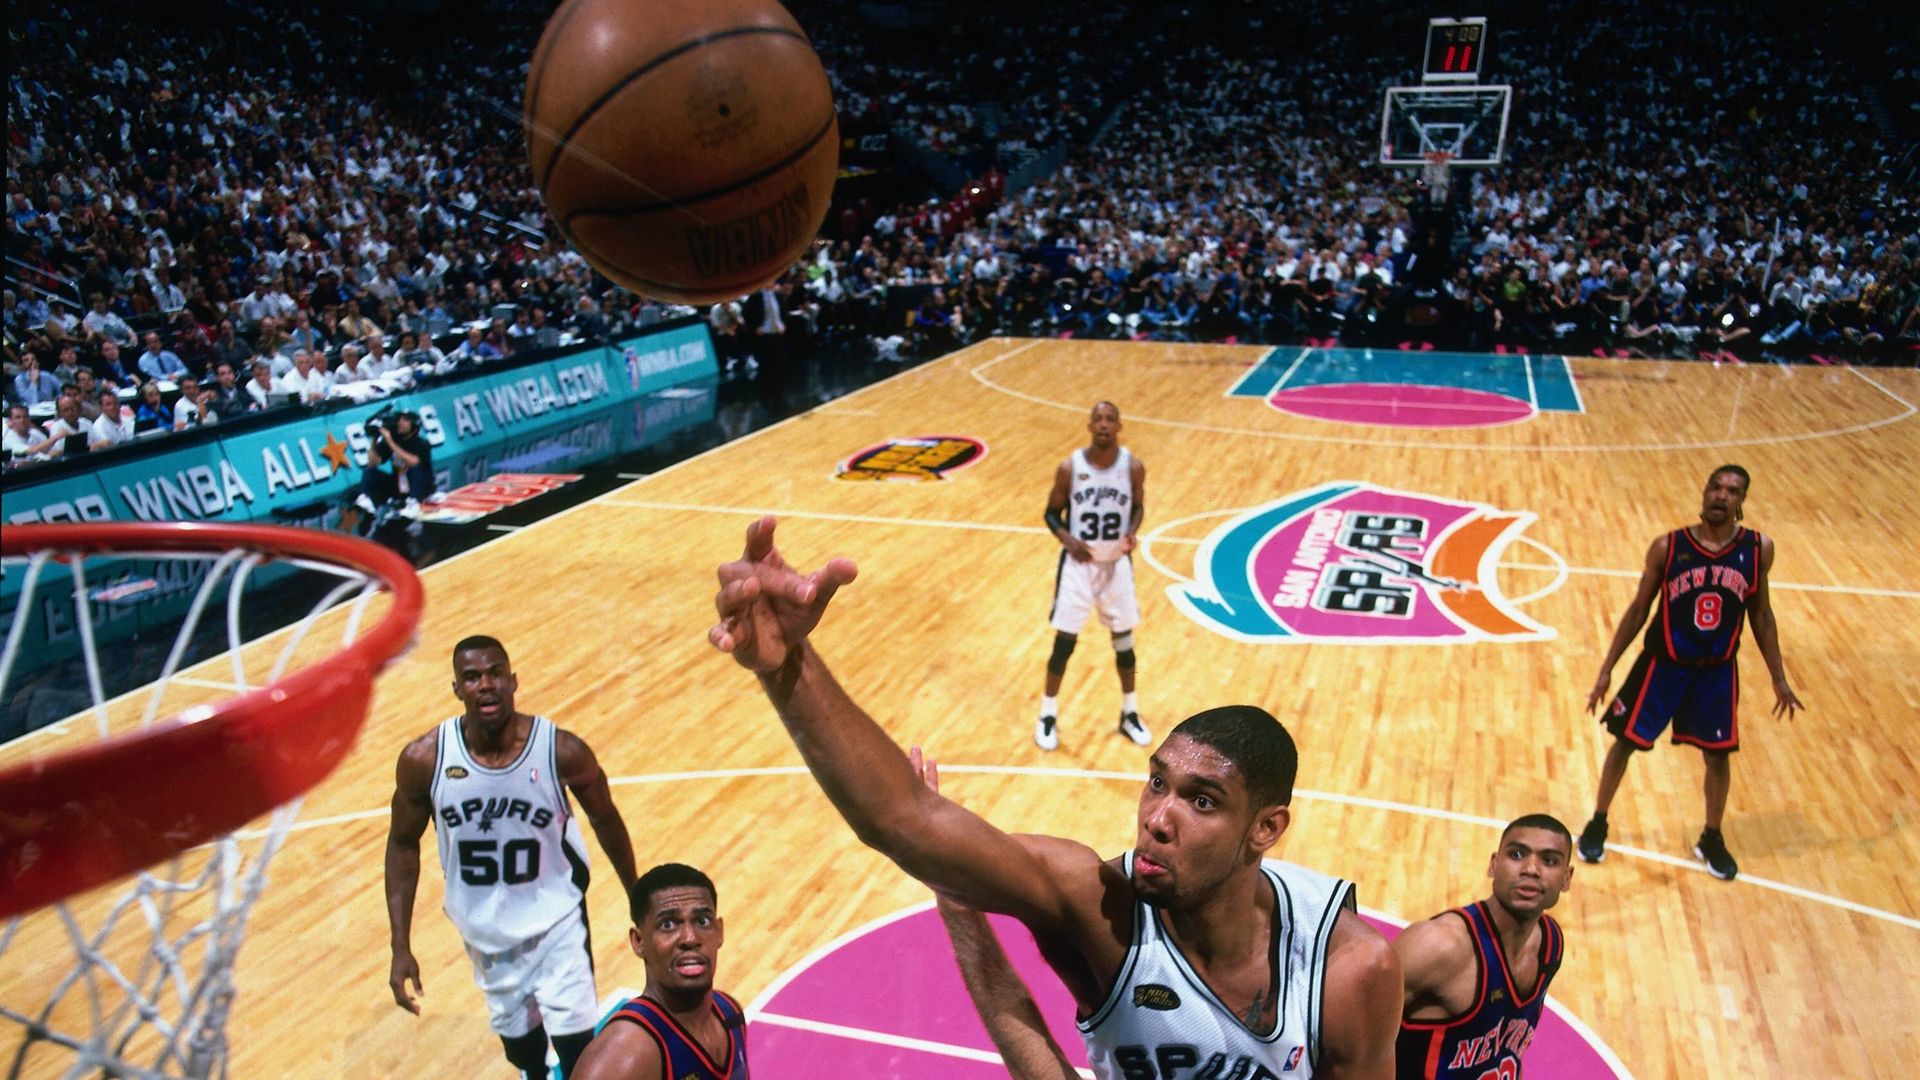 Spurs star Tim Duncan attempts a layup surrounded by New York Knicks players during the 1999 NBA Finals. 